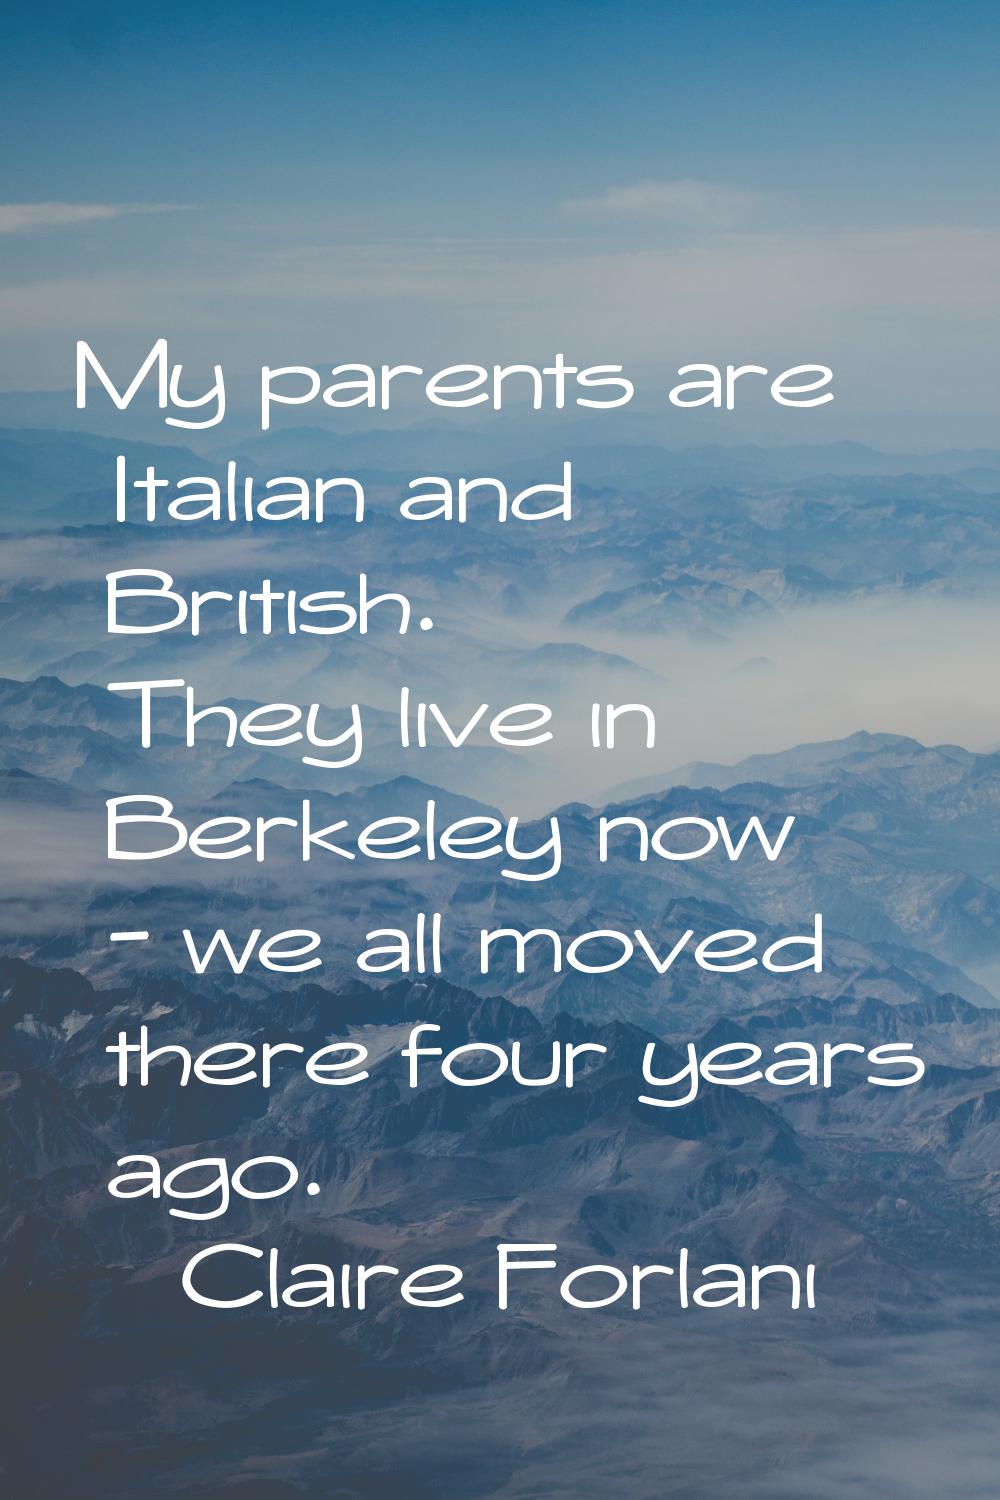 My parents are Italian and British. They live in Berkeley now - we all moved there four years ago.